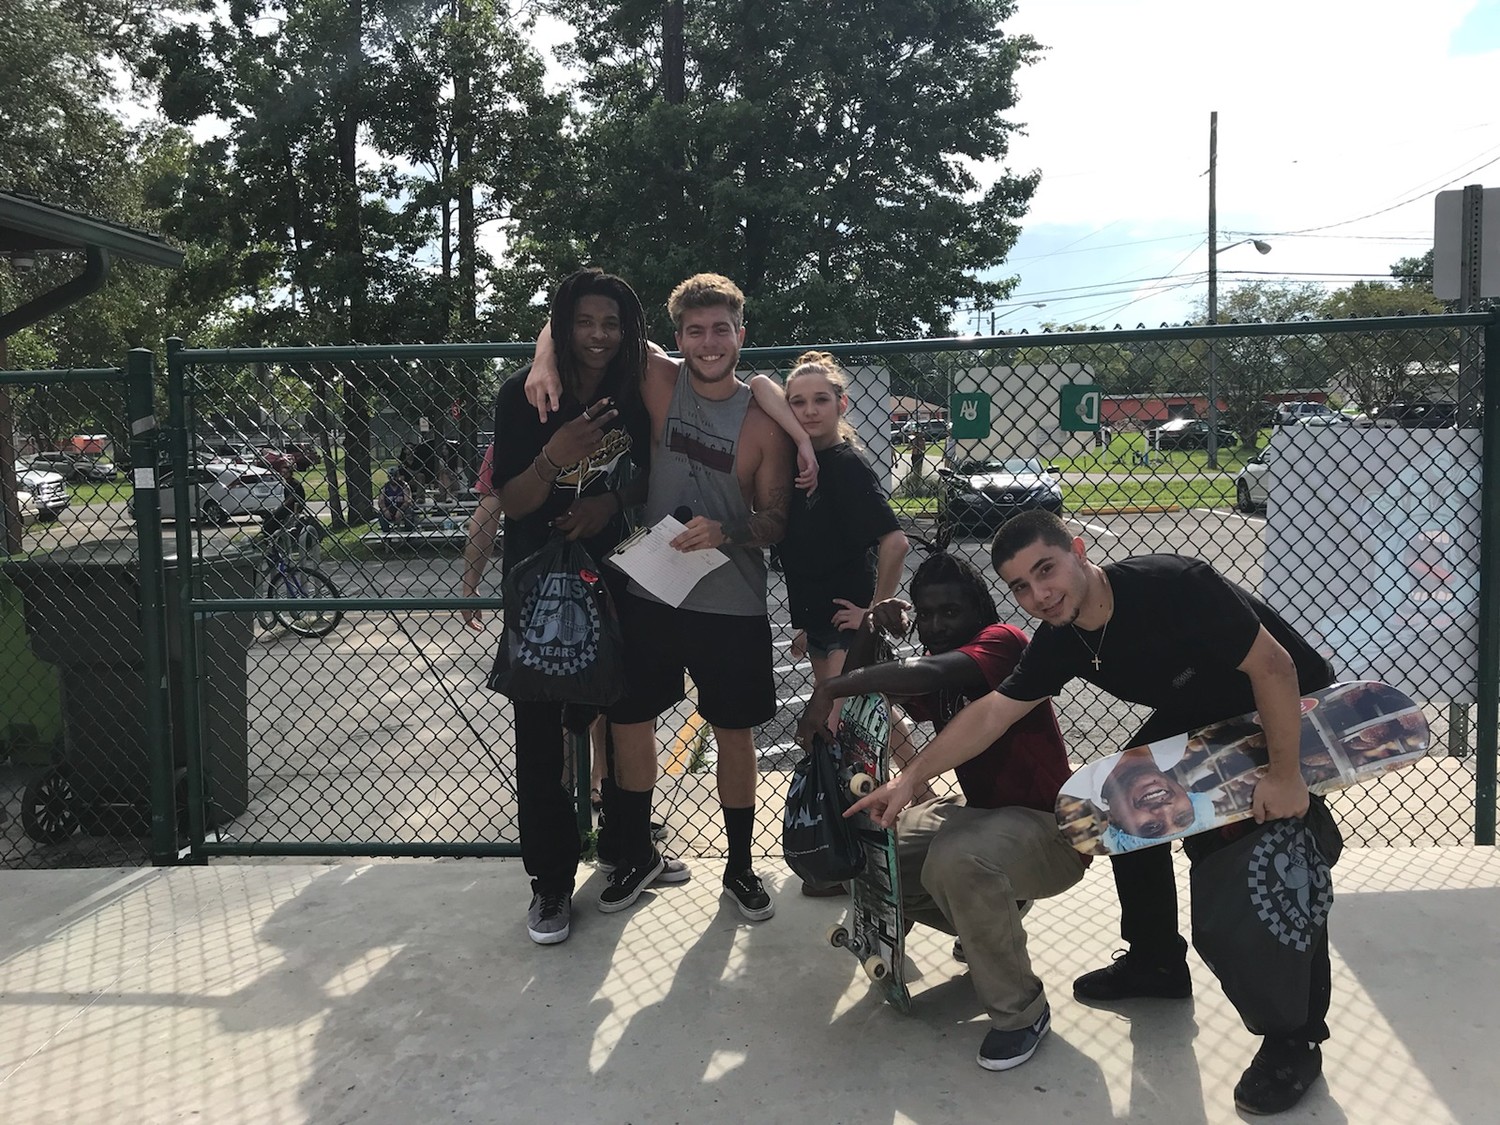 Sponsored winners were, left to right, Darius Sibley, Marcus Lizzmore and Dom Borrero. With the trio is OP Skate Park announcer Anthony Caputo and prize girl Courtney Green.